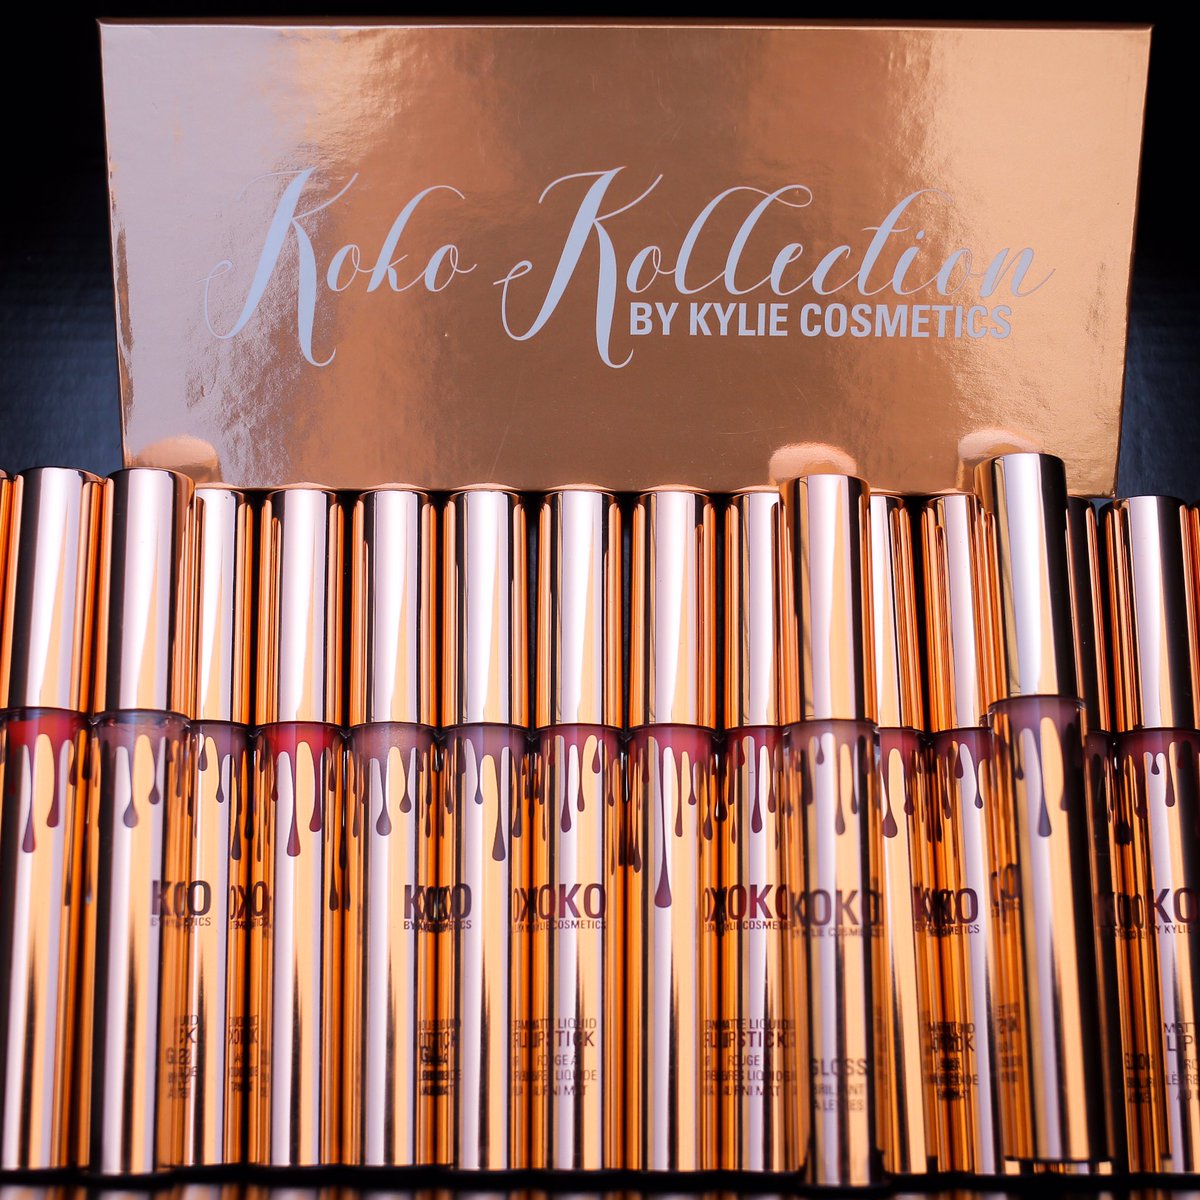 The Koko Kollection is back in stock now at https://t.co/8Tz1bLoLTe!! ❤ https://t.co/Hh8VC8a8h4